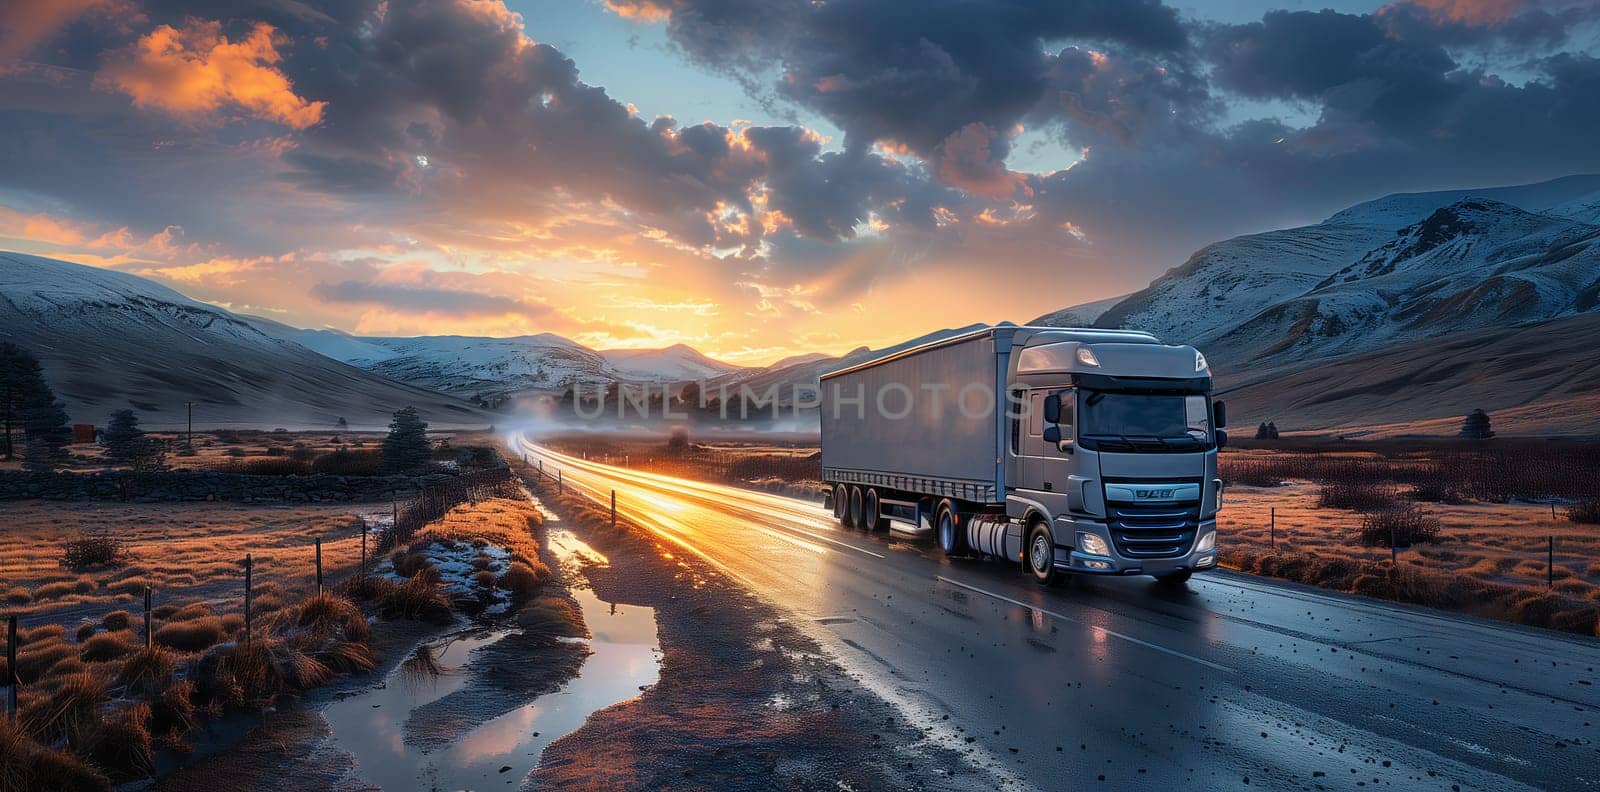 A vehicle travels on wet mountain road at sunset, with clouds in the sky by richwolf